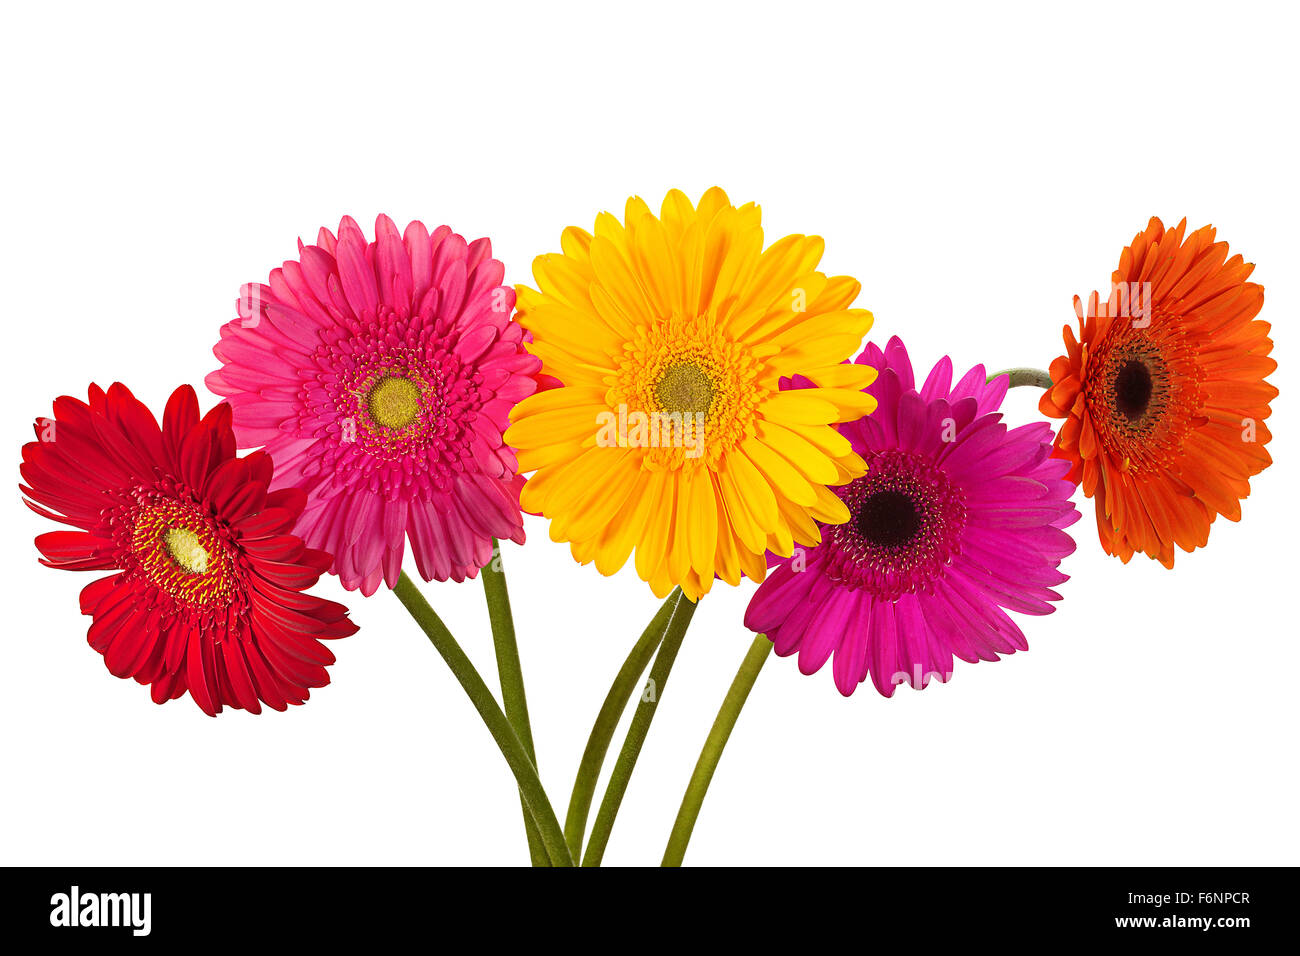 Gerbera flower bouquet isolated on white background Stock Photo